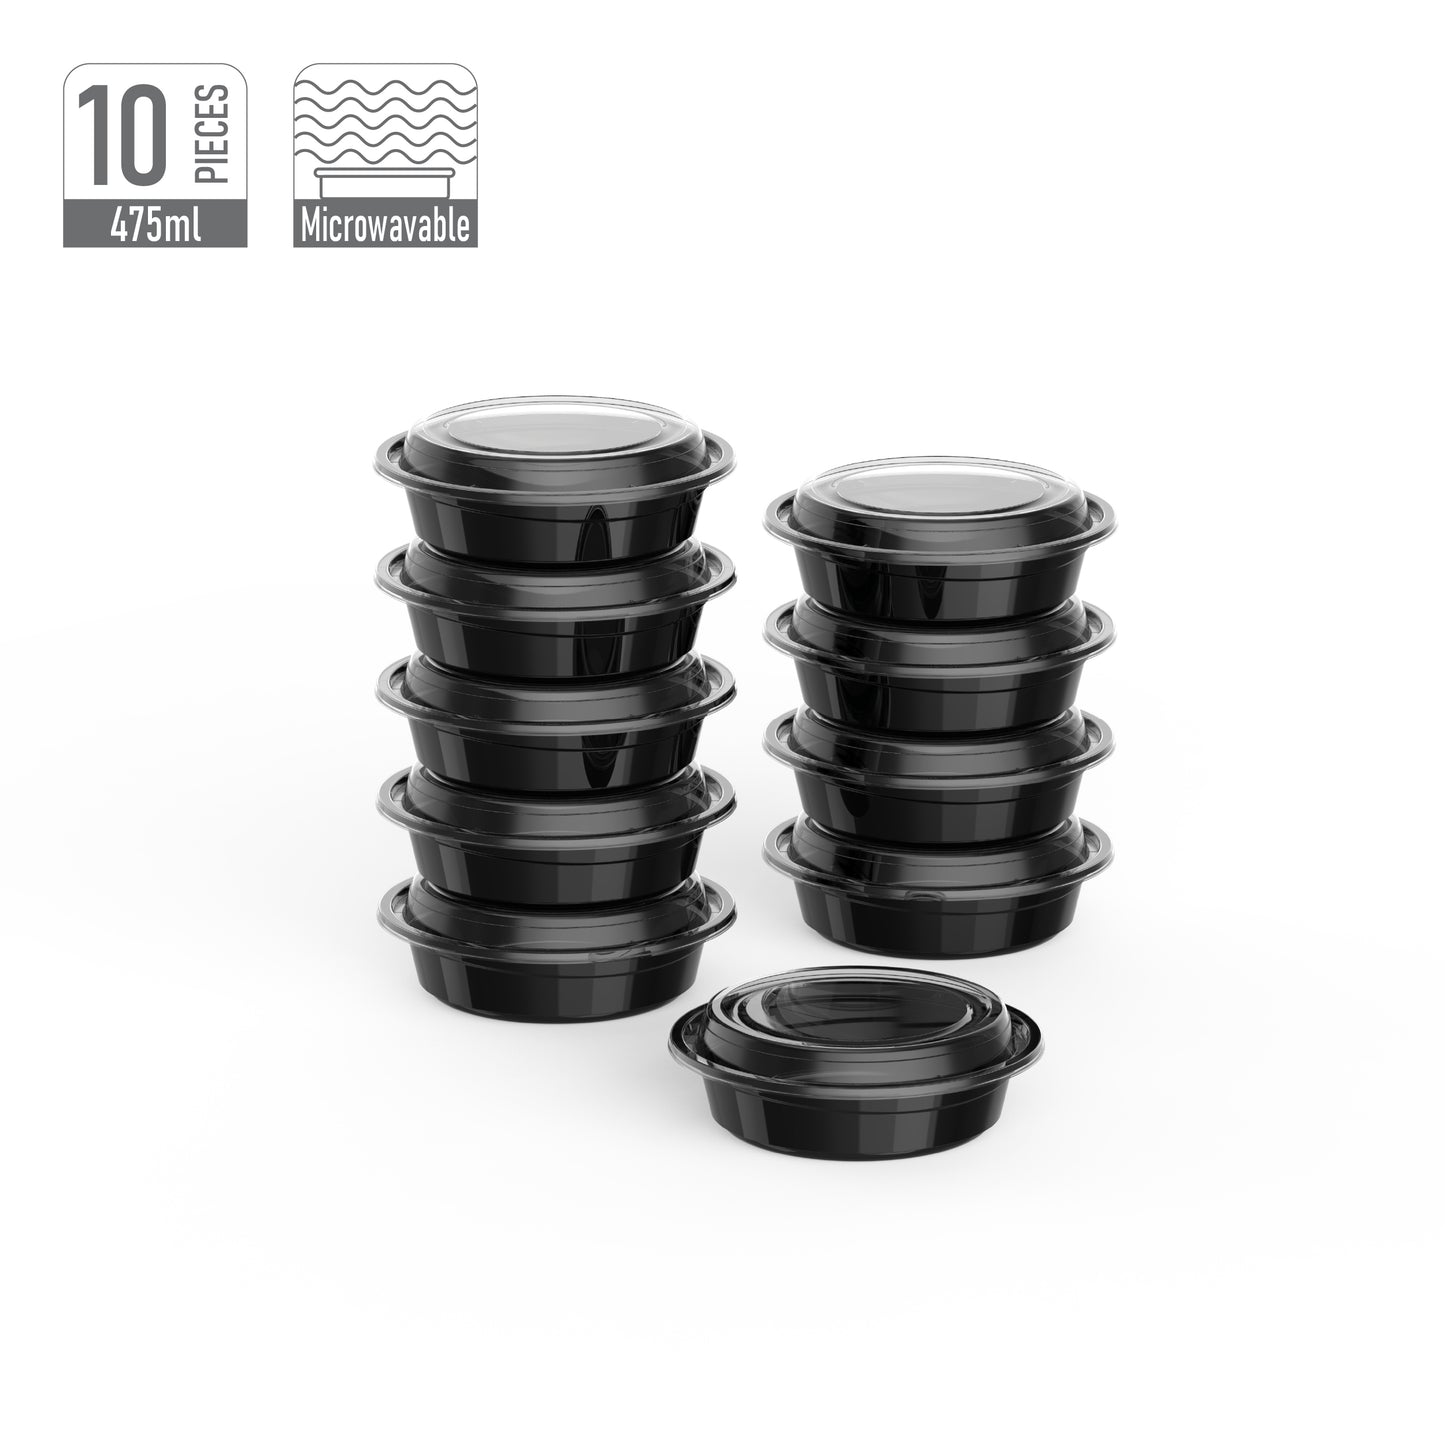 475 ml Pack of 10 RO16 Black Microwave Containers with Clear Lids